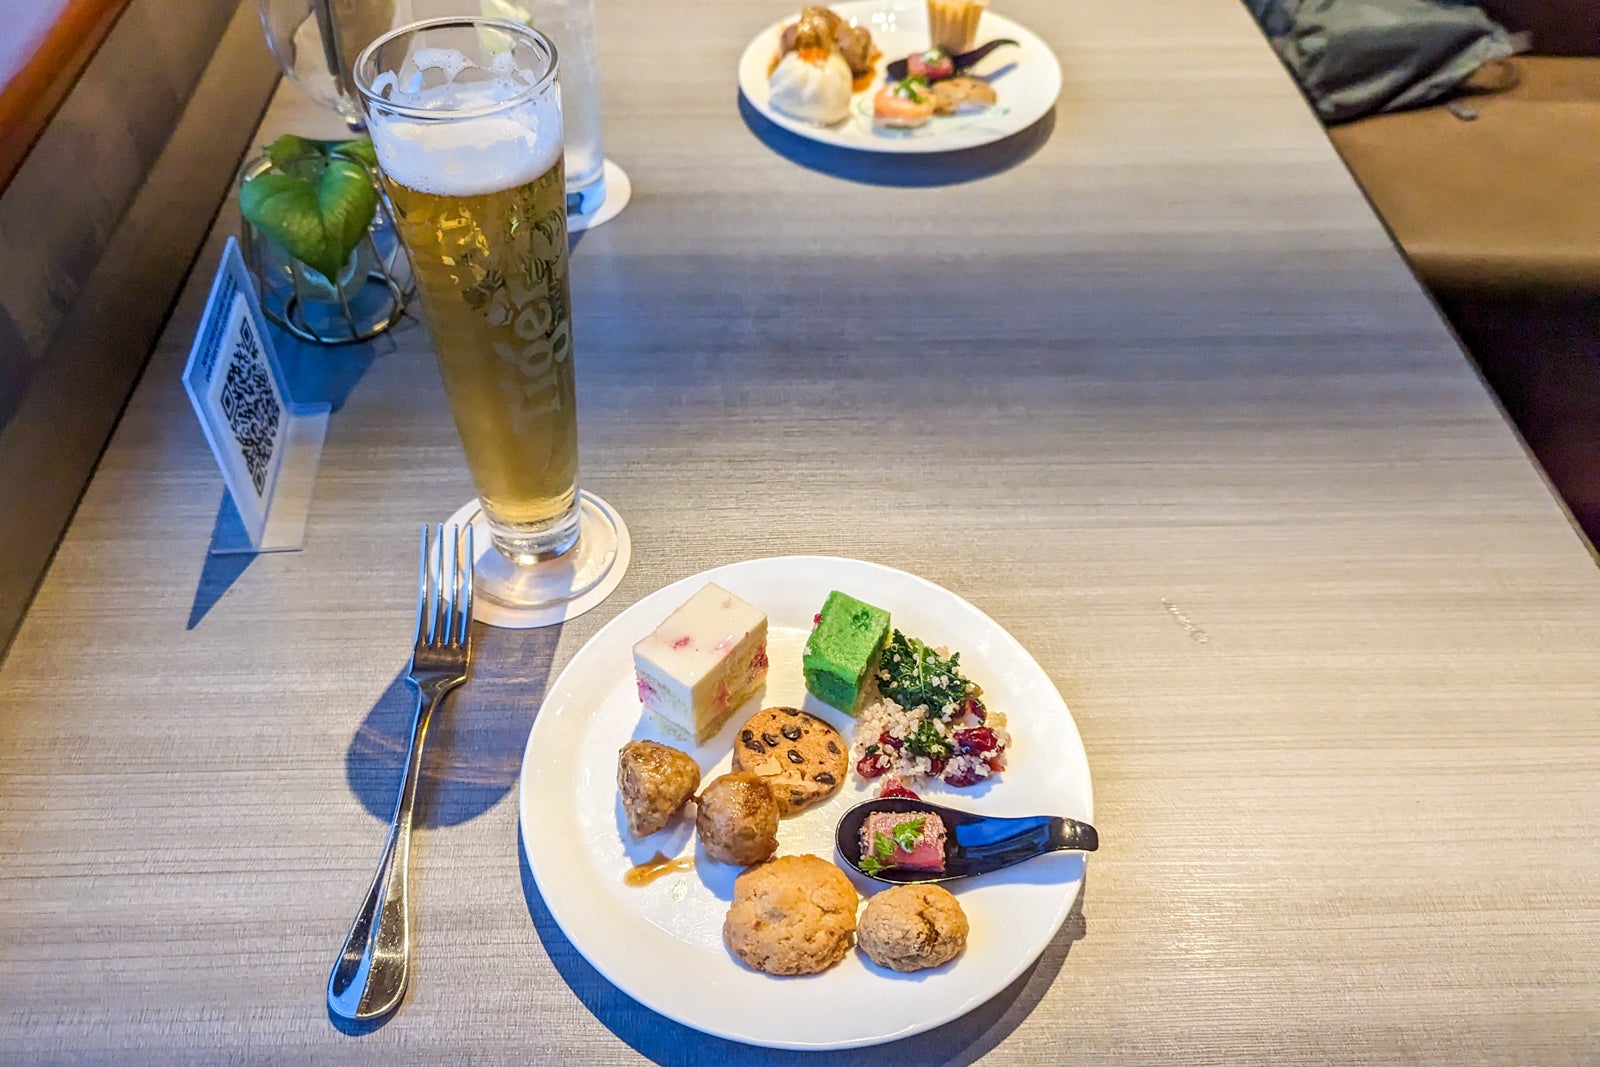 Food at the Executive Lounge in the Holiday Inn Singapore Atrium